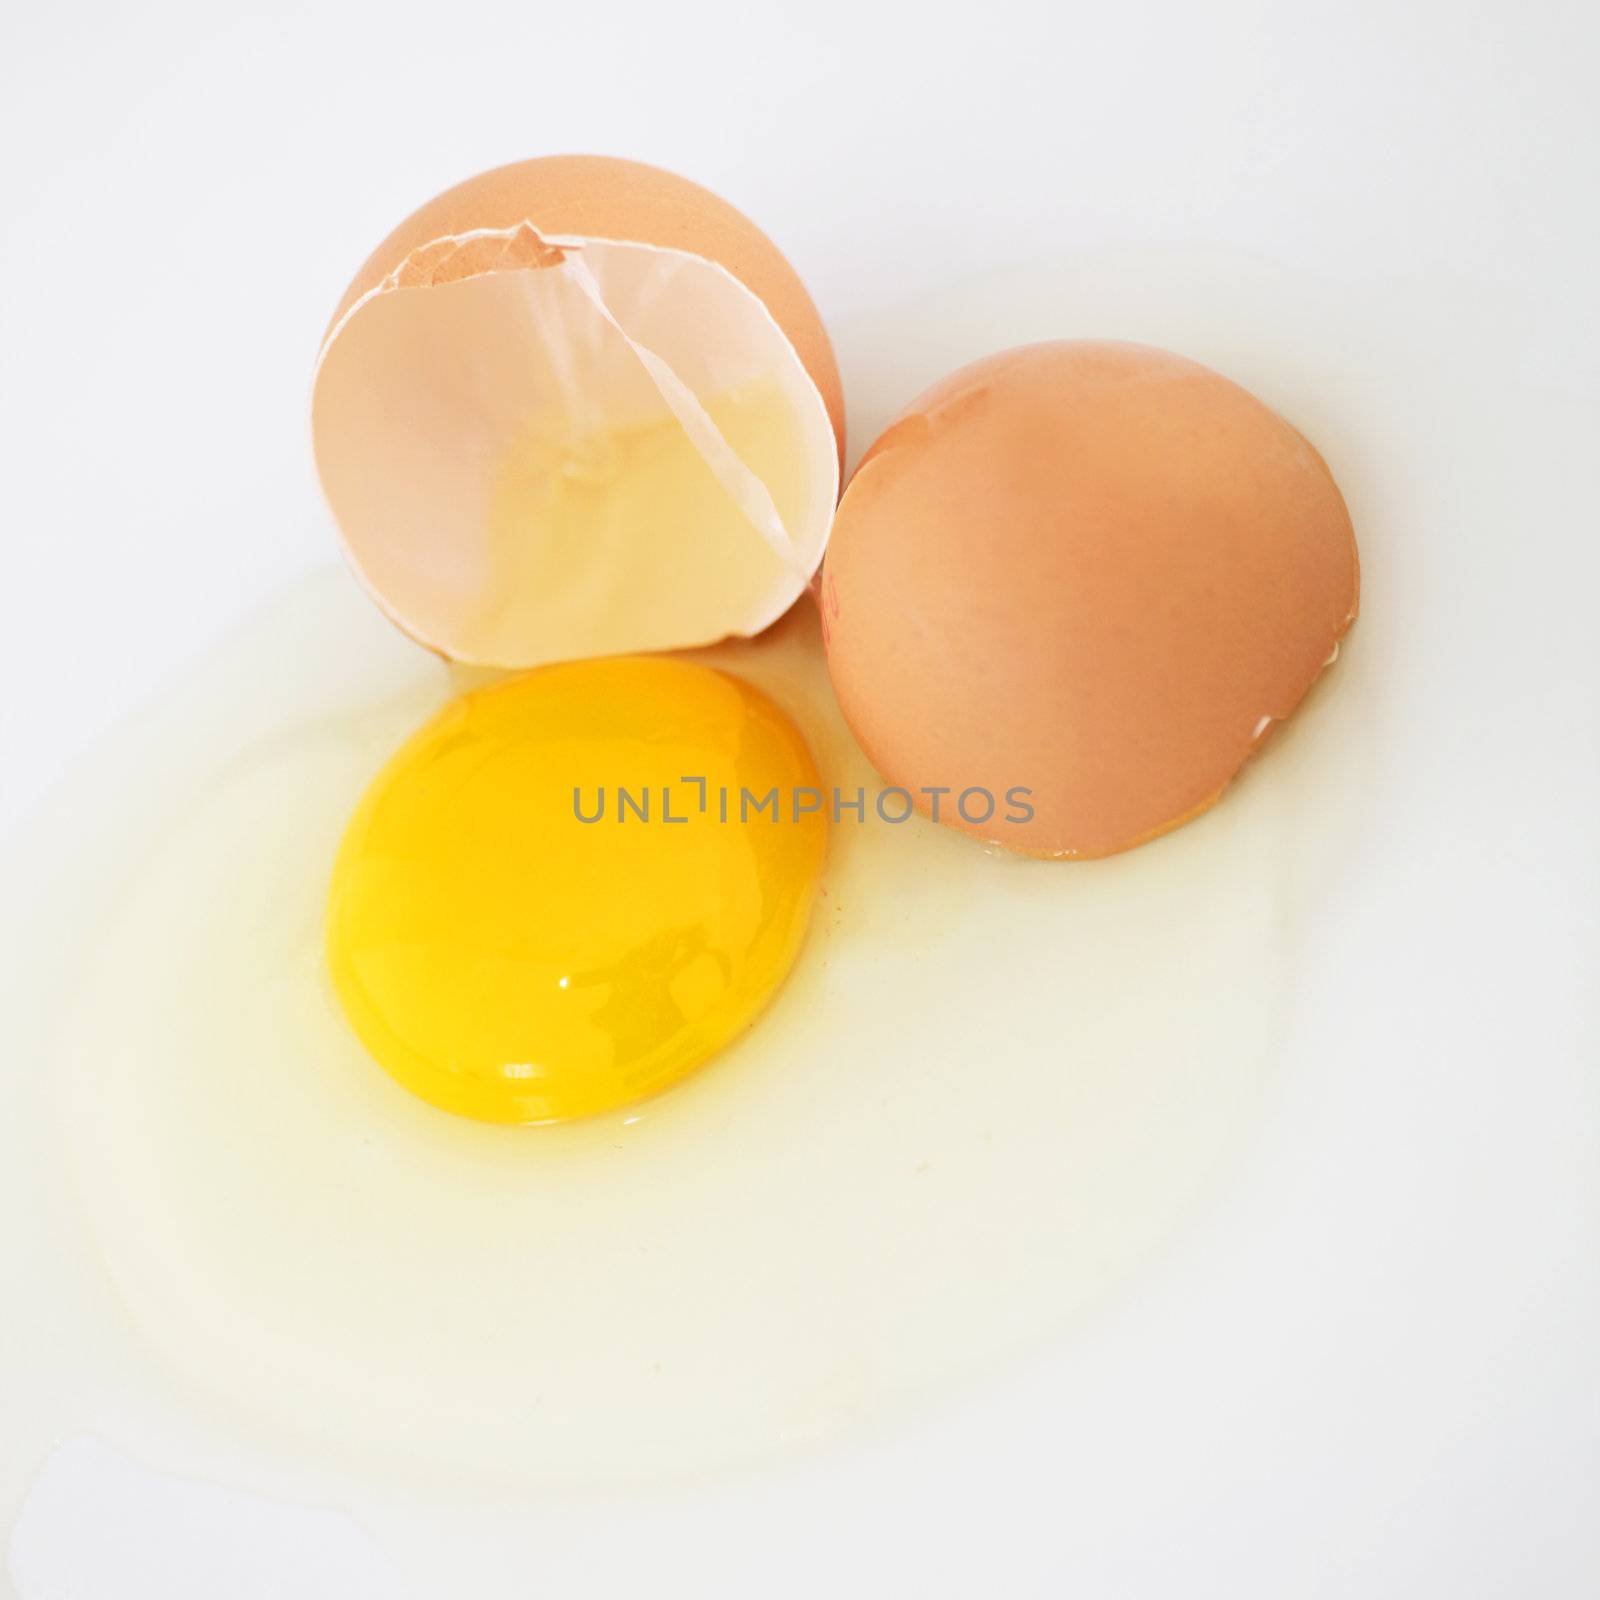 Cracked fresh hens egg with the bright yellow yolk and transparent albumin or egg white running over a white background